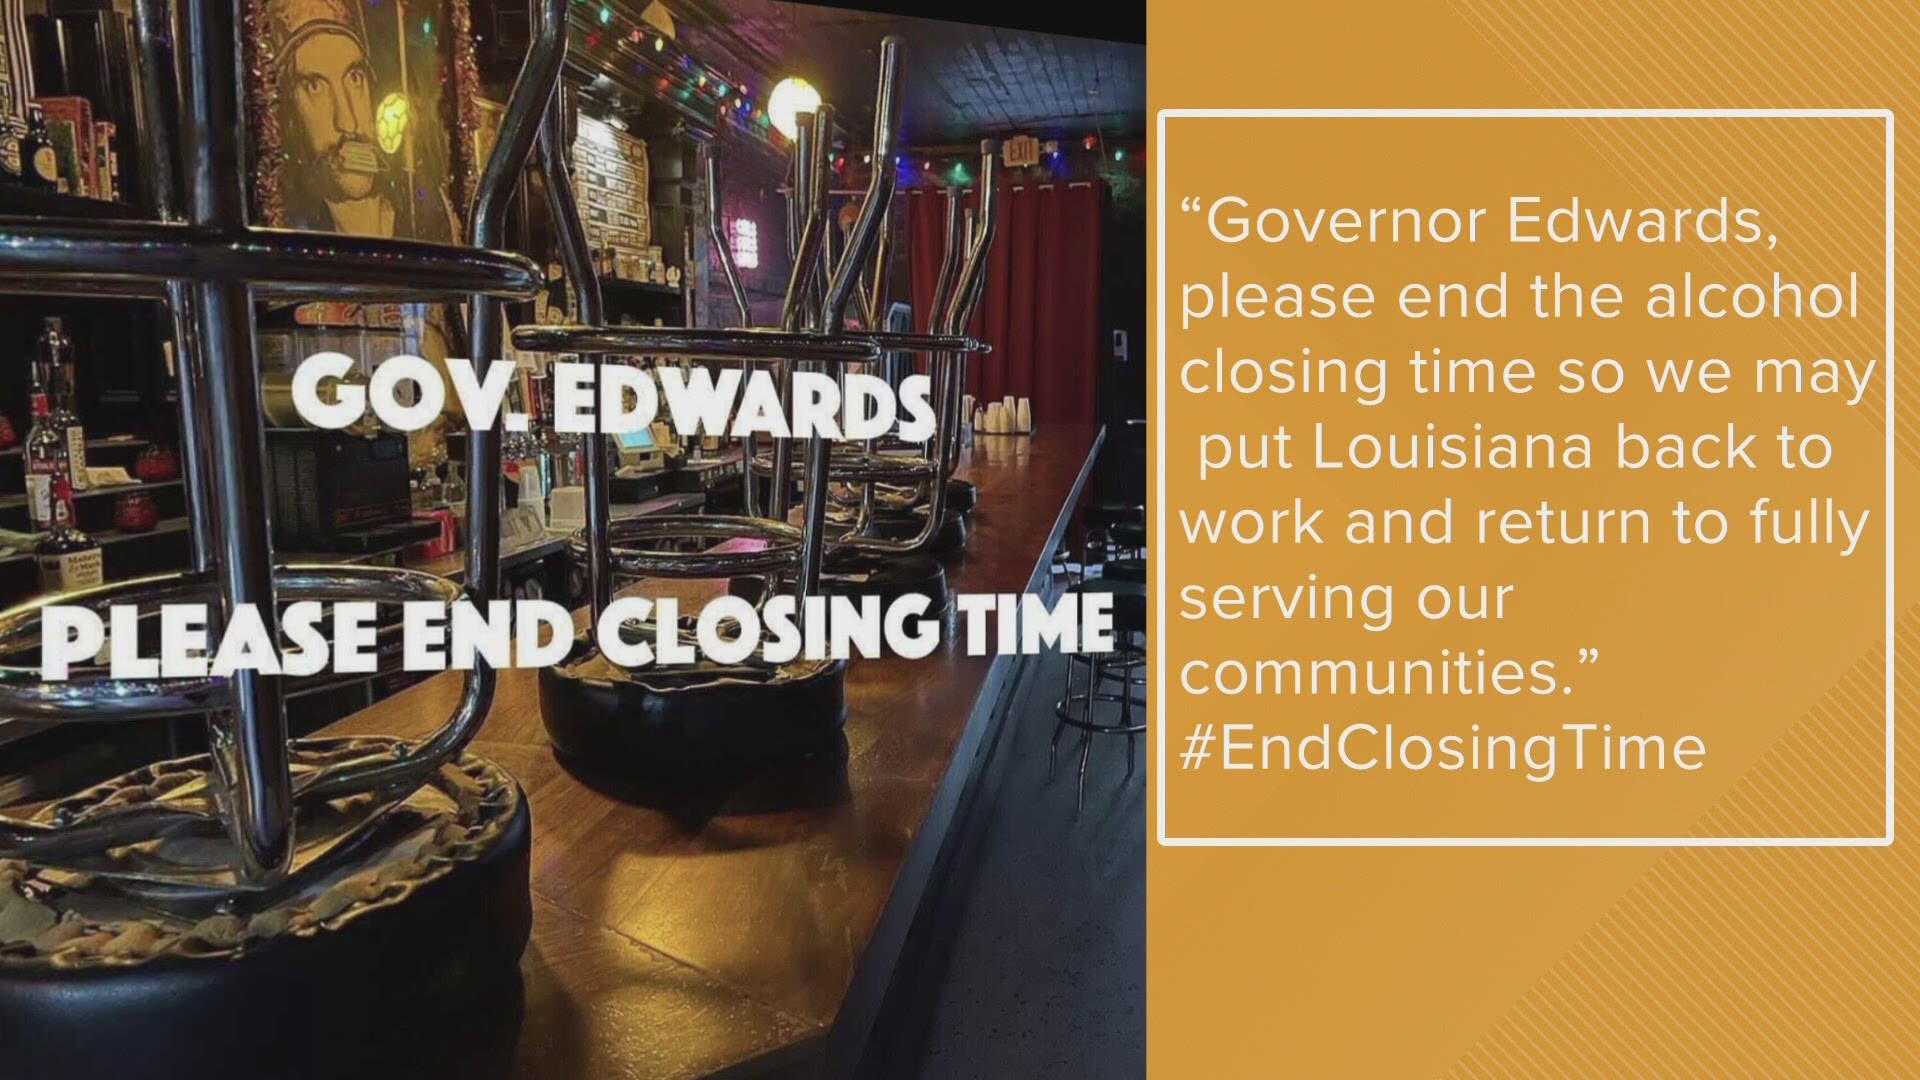 New Orleans bars are asking the governor to extend operating hours in order to provide more sales to customers and get more money to employees.